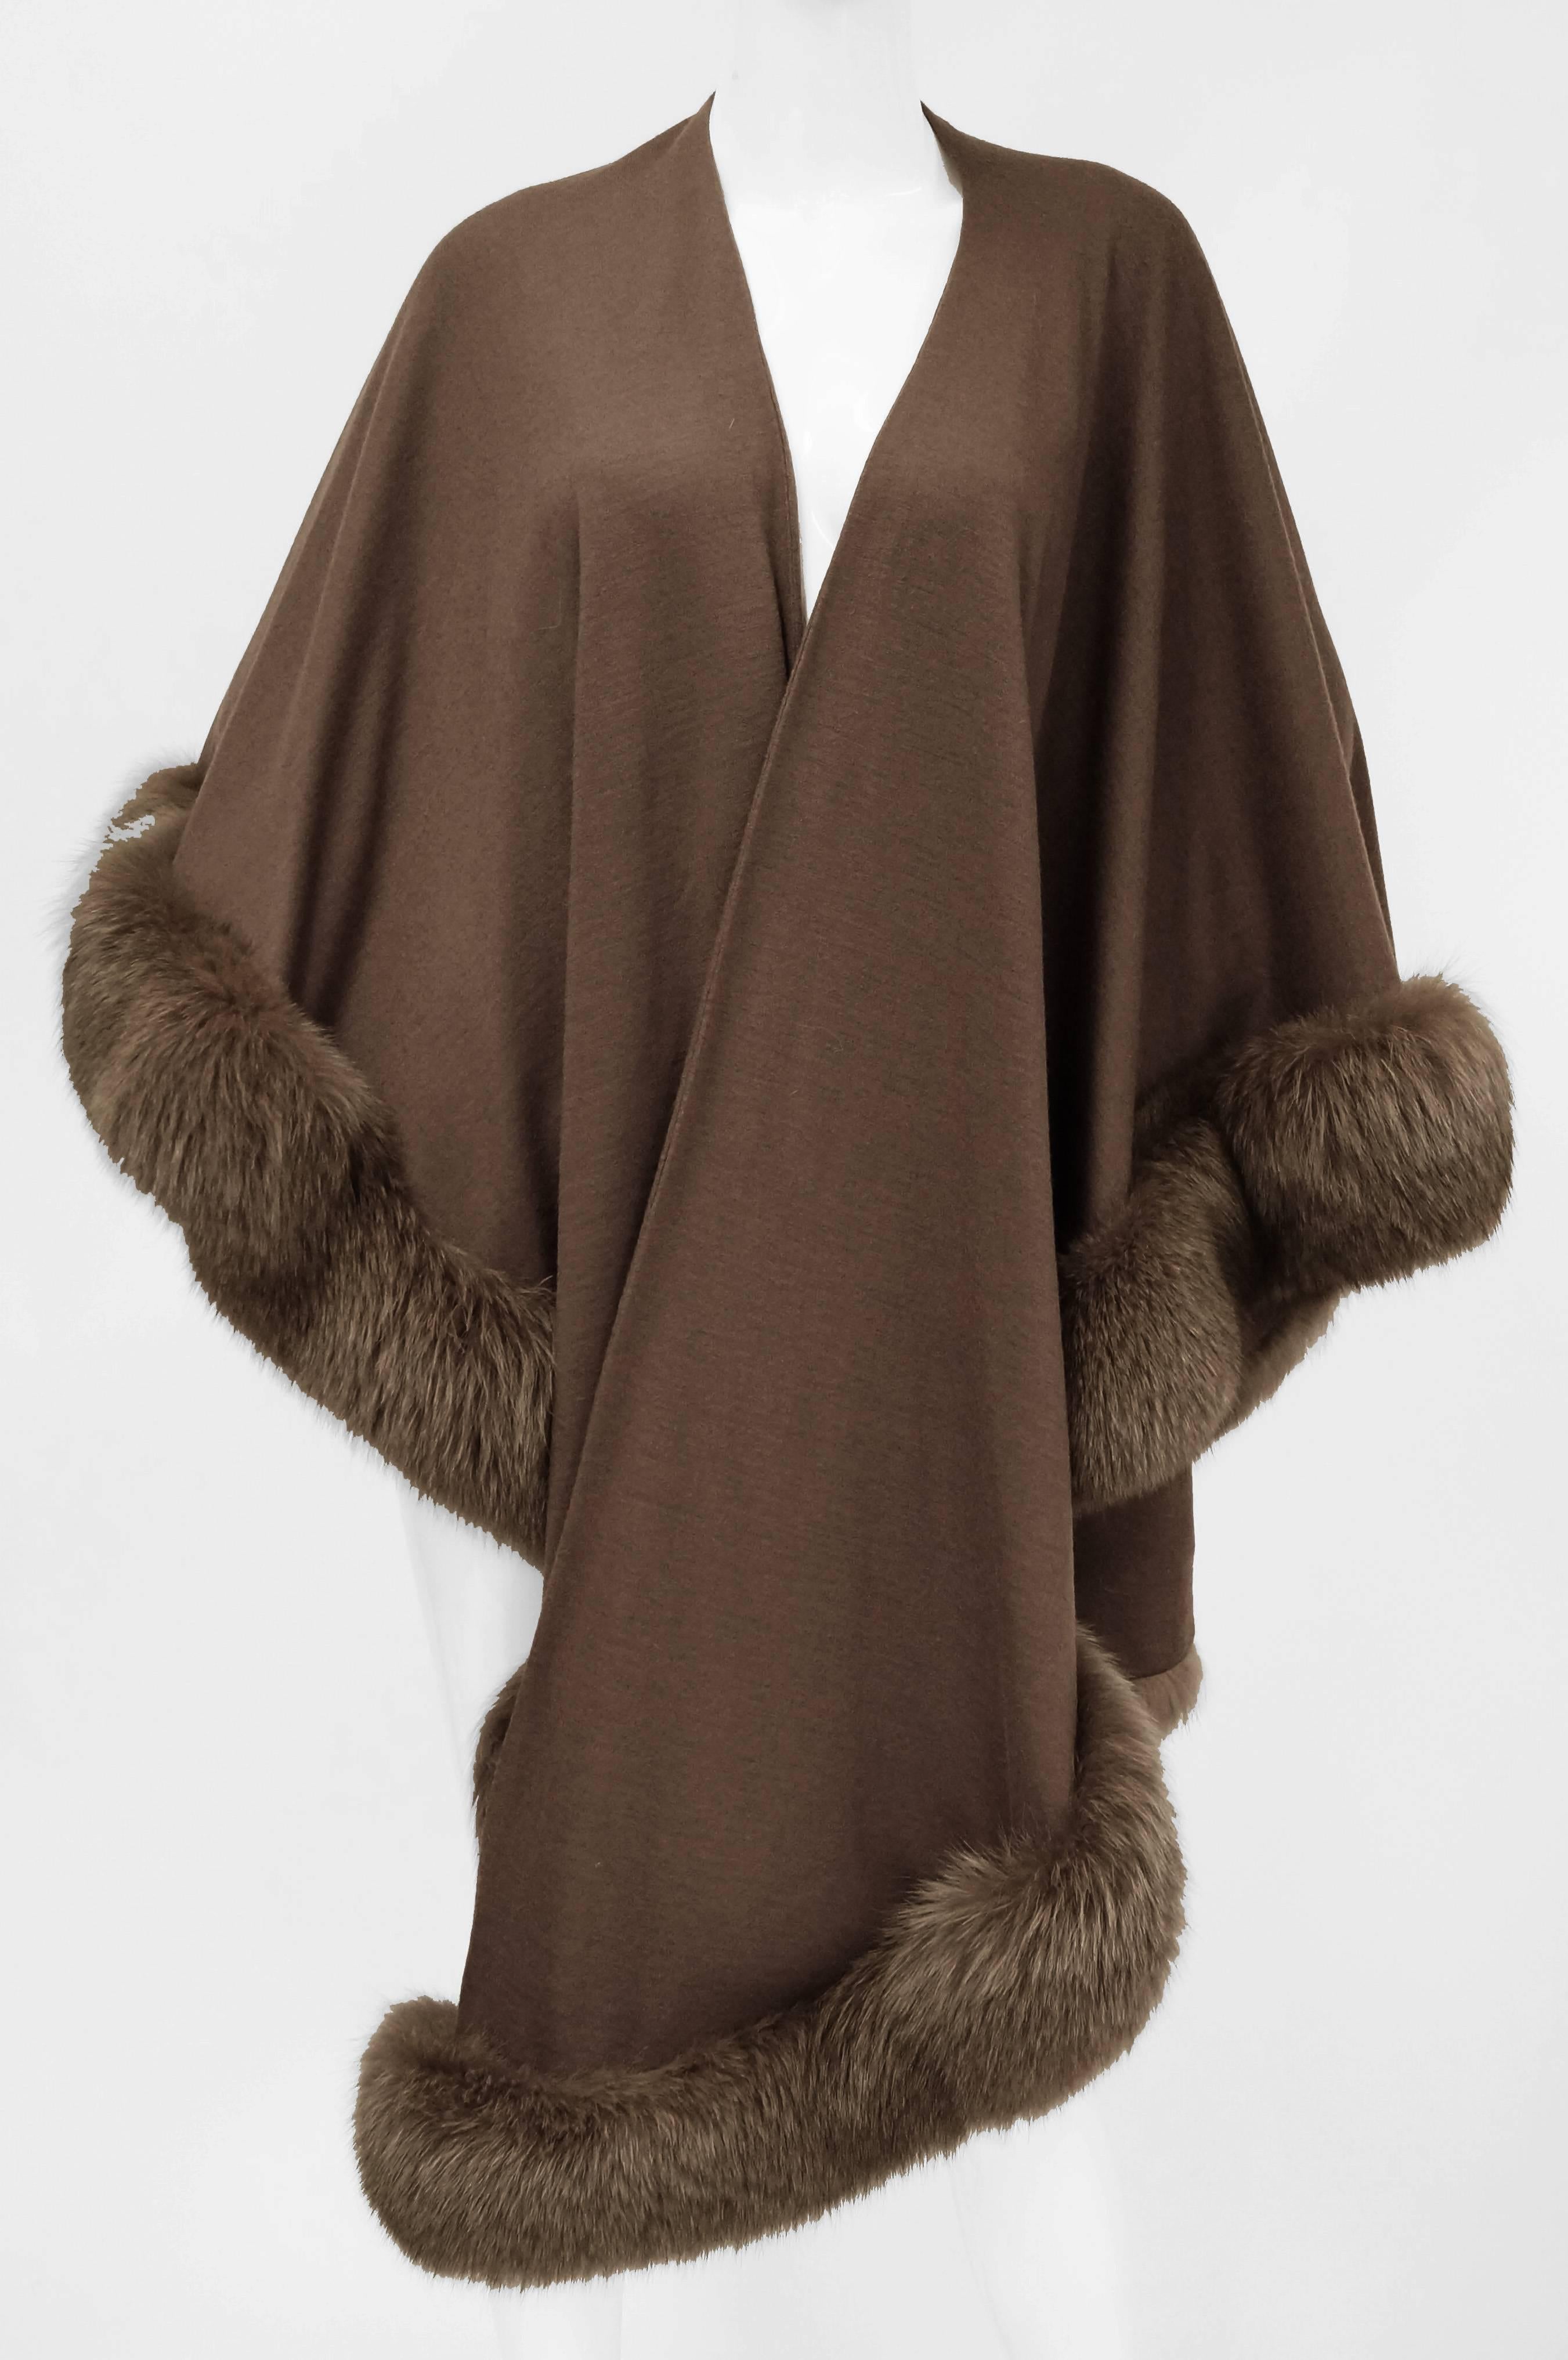 Sumptuous is an understatement! This solid toffee-colored shawl by Adrienne Landau is circularly cut with a straight center line up to the neck. The shawl is made of a medium-weight wool that is weighed down with fox fur trim. The shawl bounces